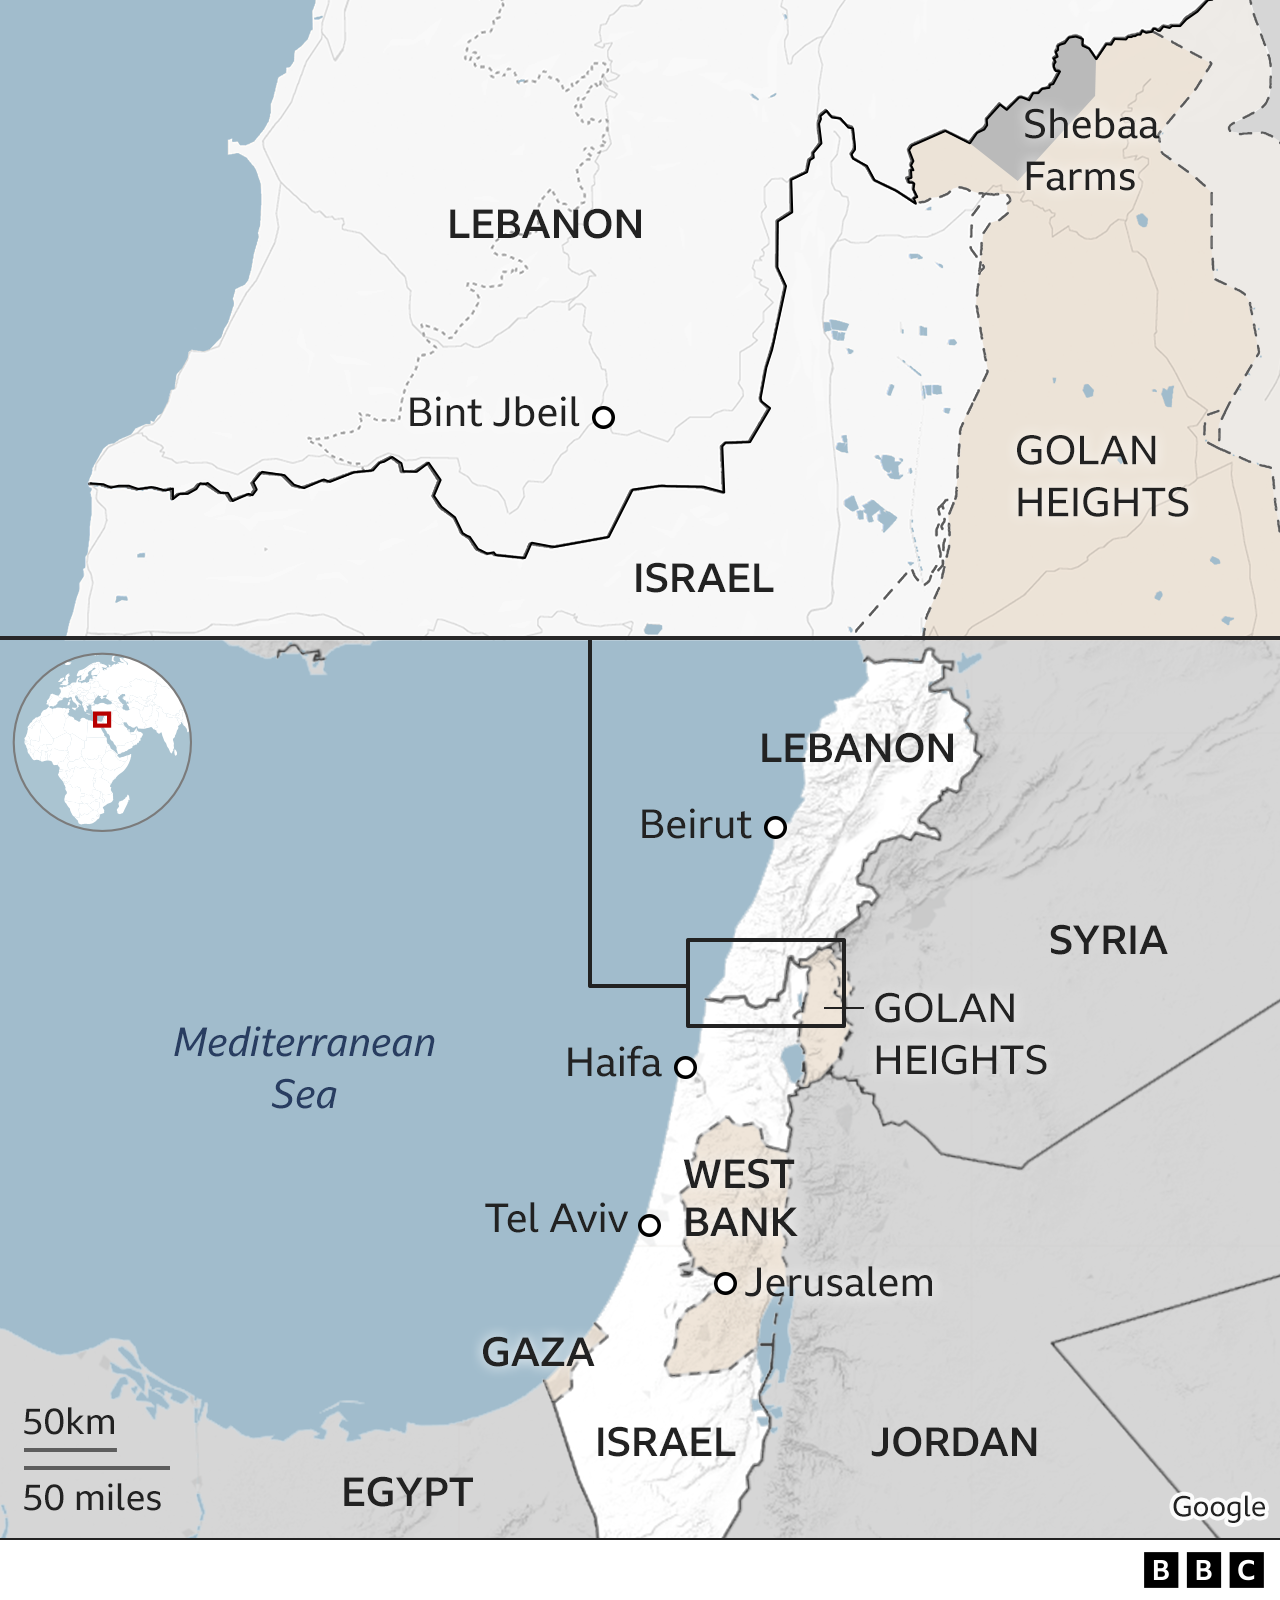 Map showing Israel and Lebanon, including location of Bint Jbeil